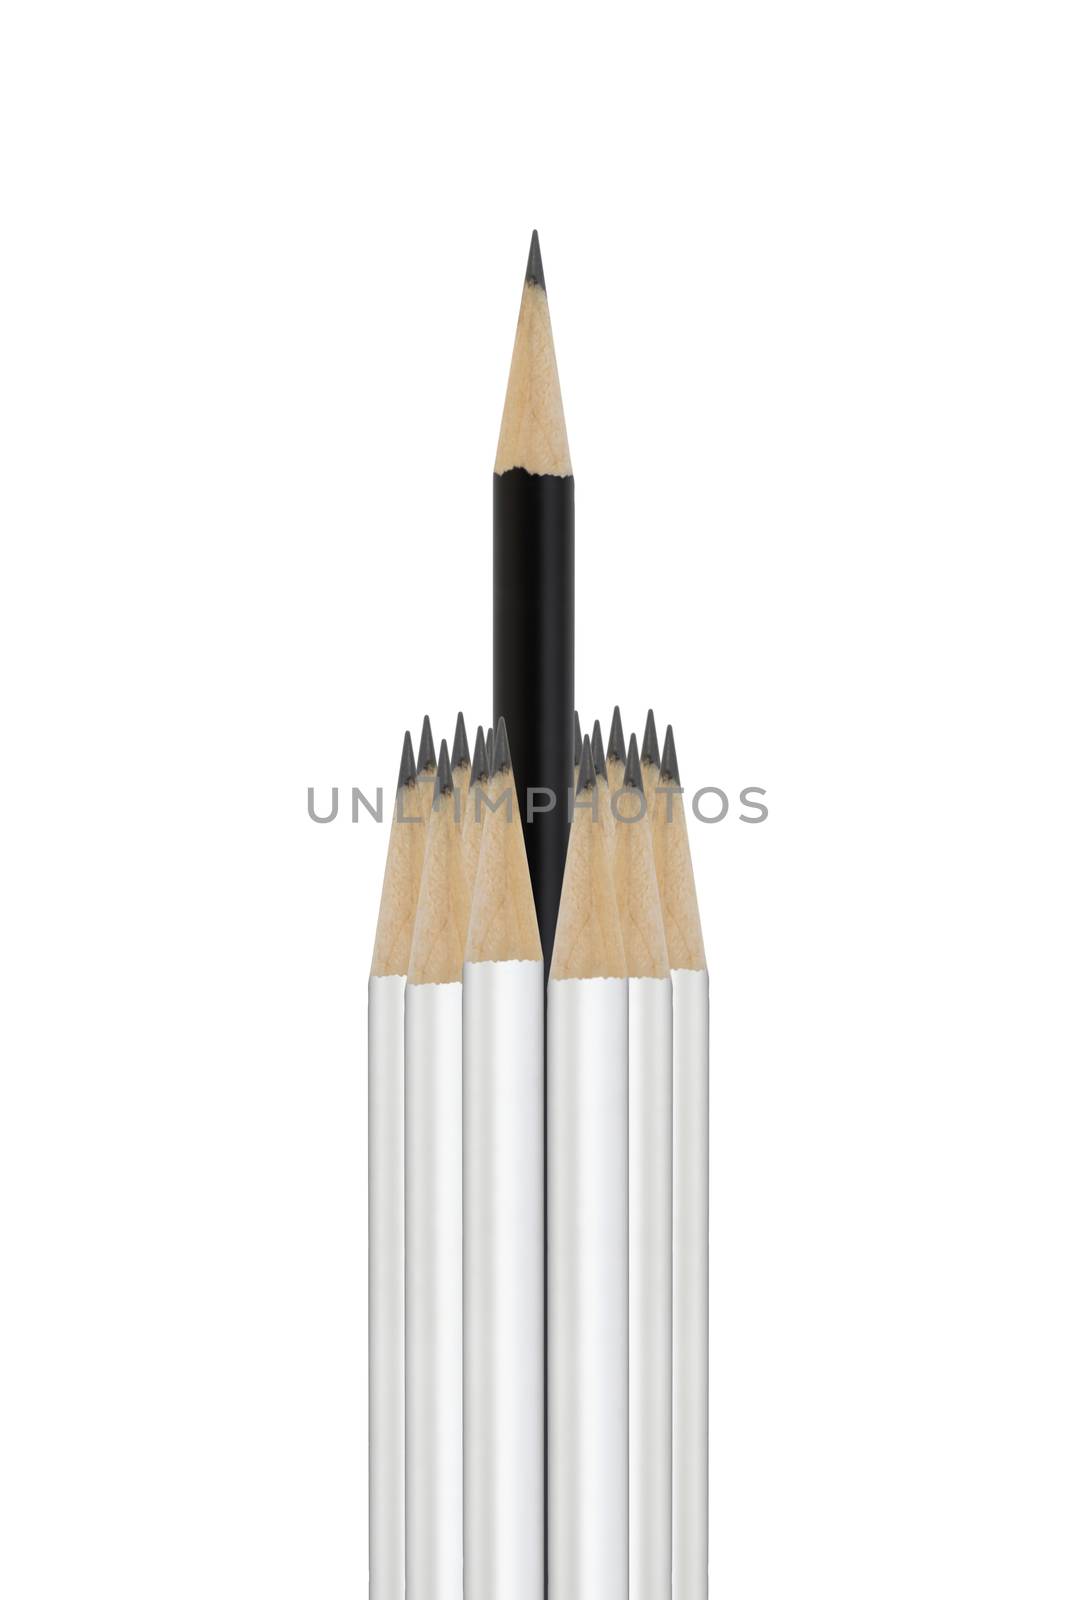 A black pencil grouped within white pencils signifying difference beating the odds success rising above